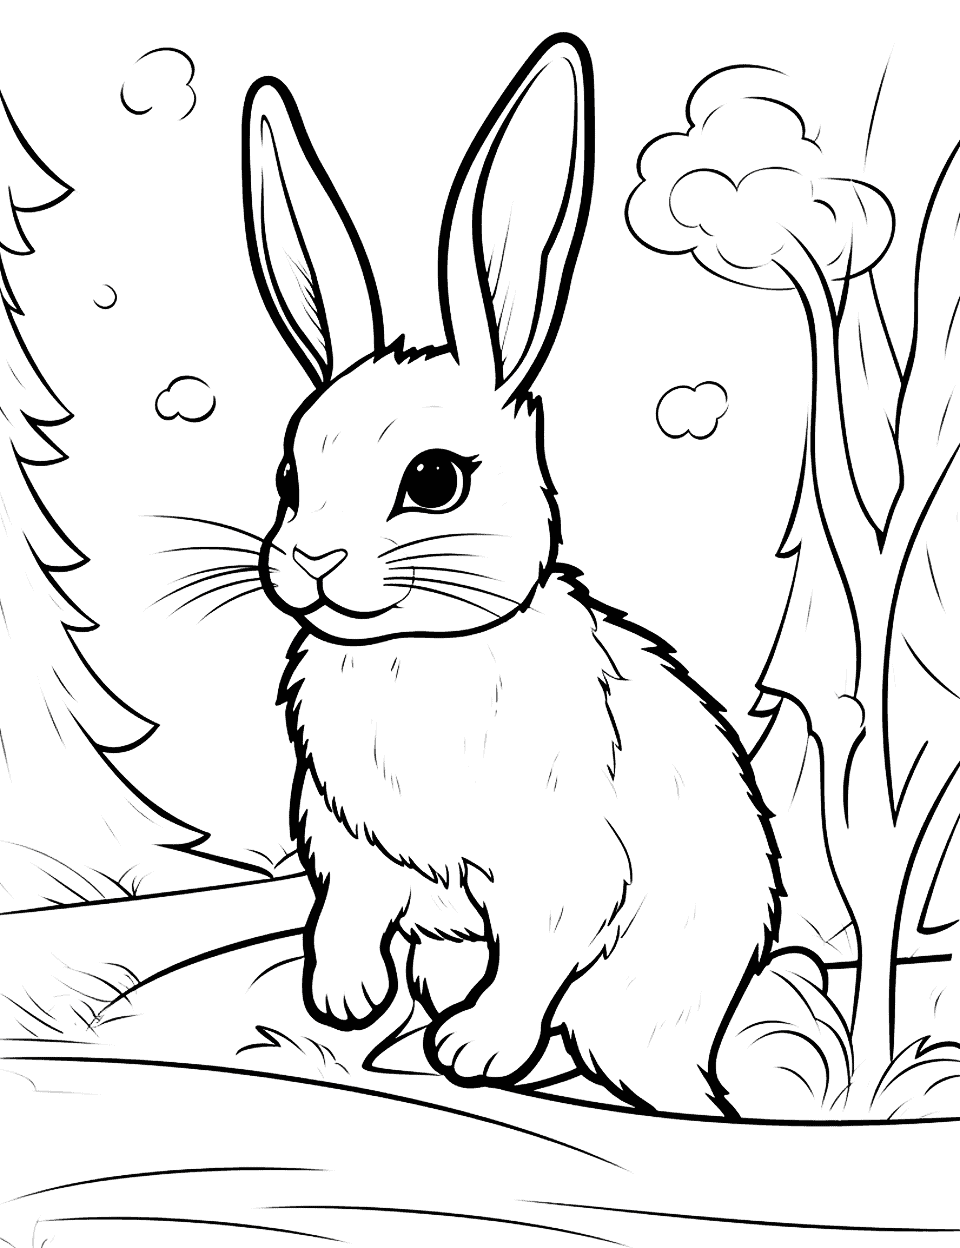 Cottontail Rabbit in the Snow Bunny Coloring Page - A cottontail bunny hopping in a snowy setting.